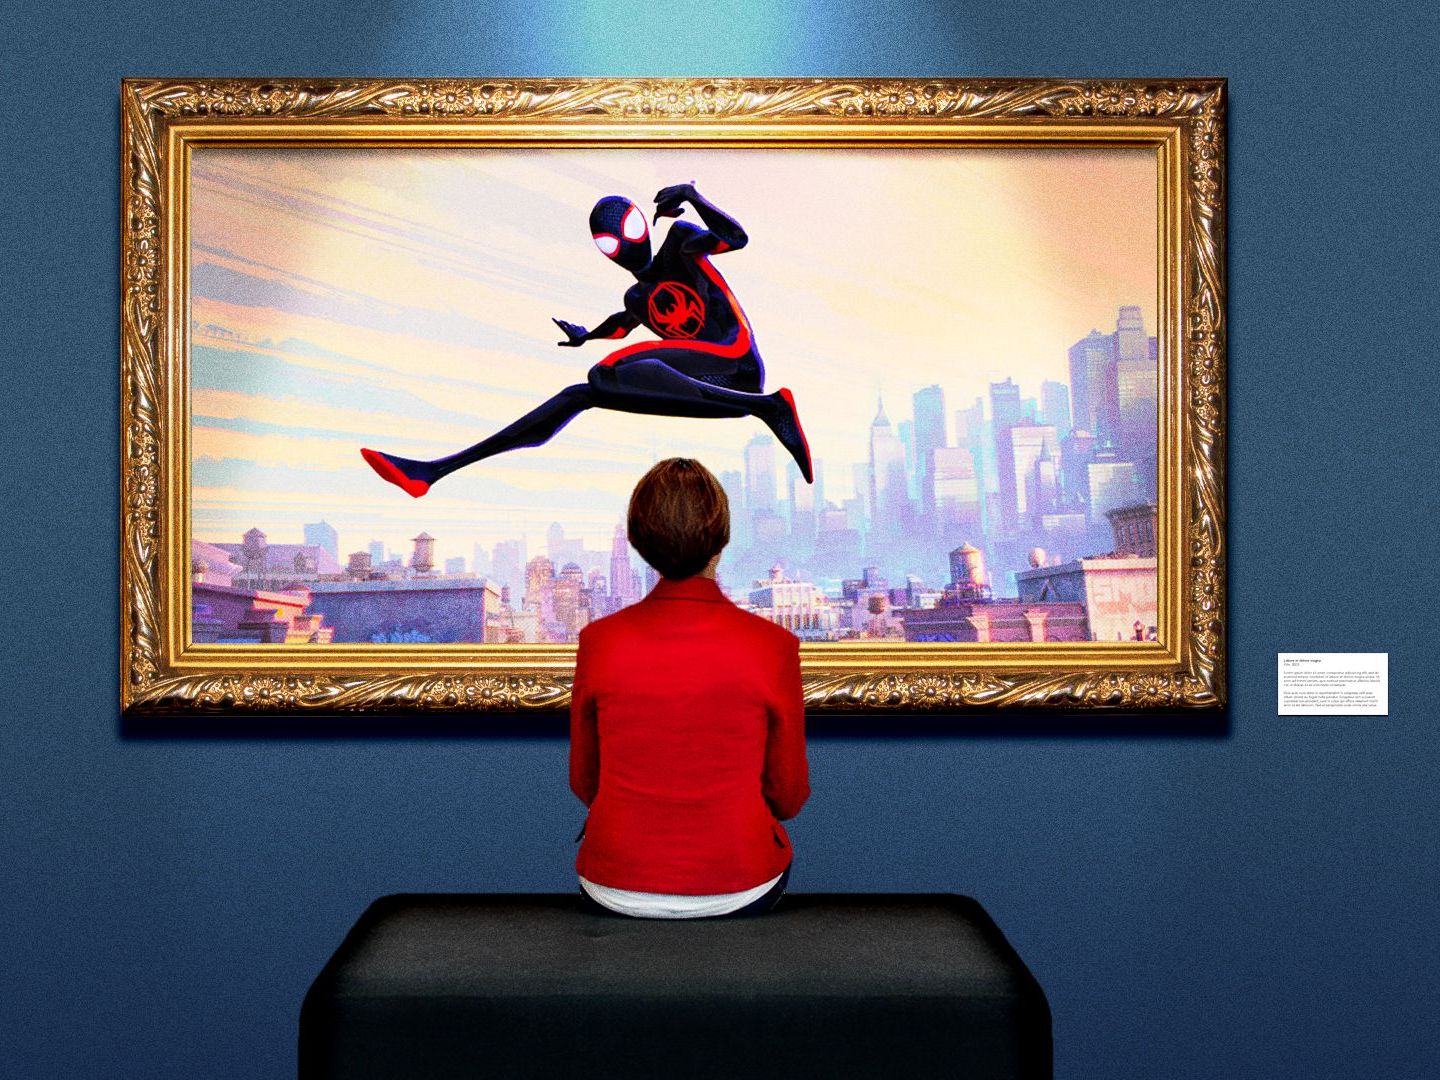 Exclusive Spider-Man: Across the Spider-Verse Behind-the-Scenes